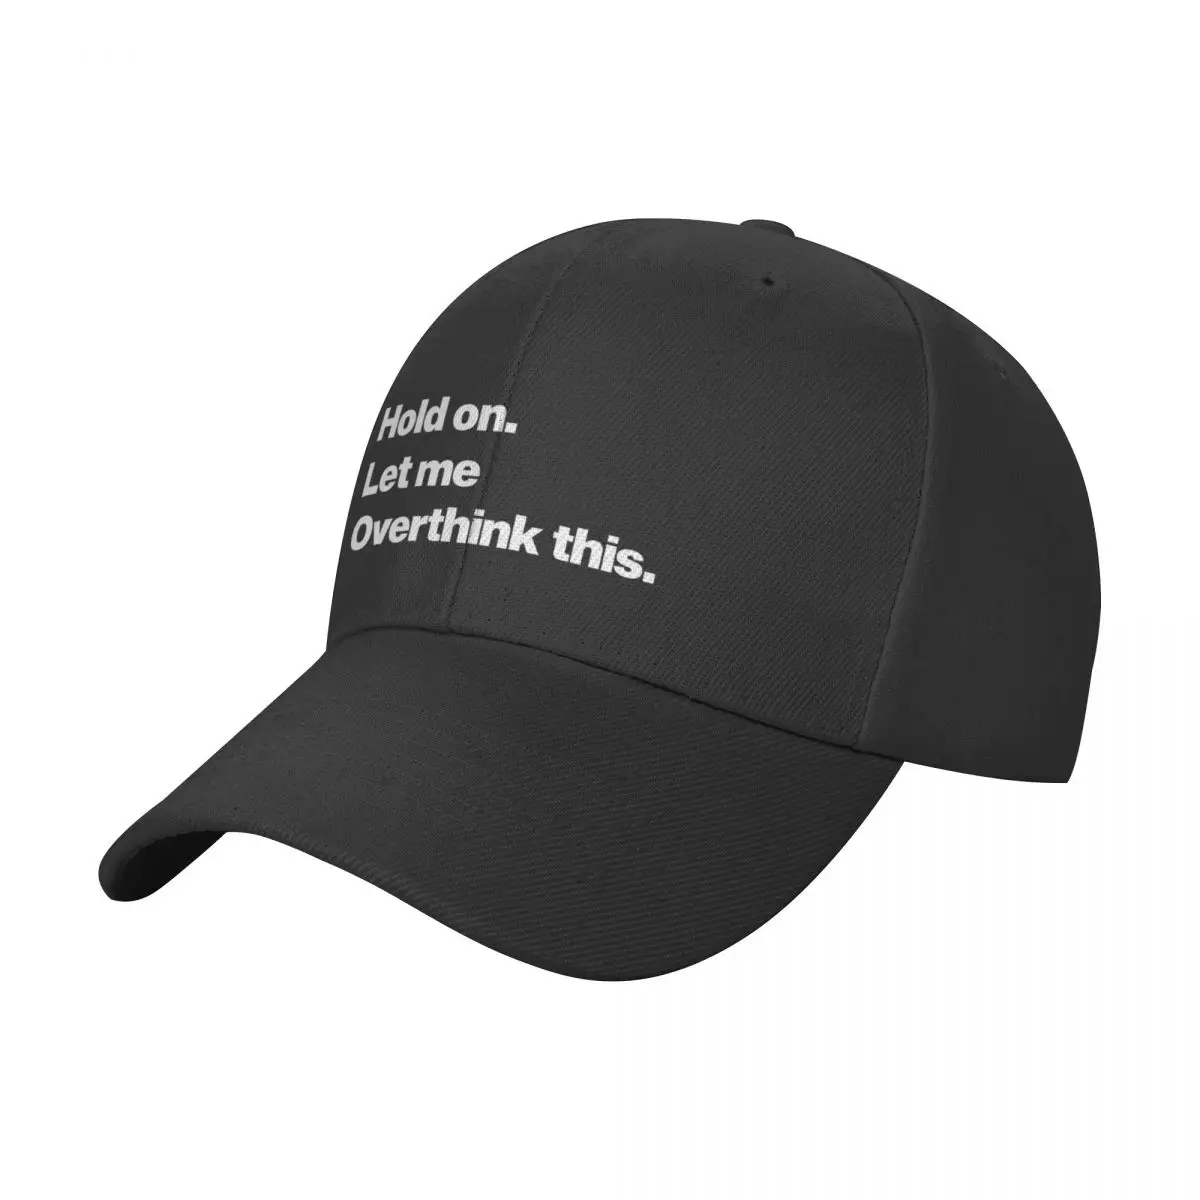 

Hold On Let Me Over Think This Baseball Cap Luxury Cap Anime Hat Women Hats Men's